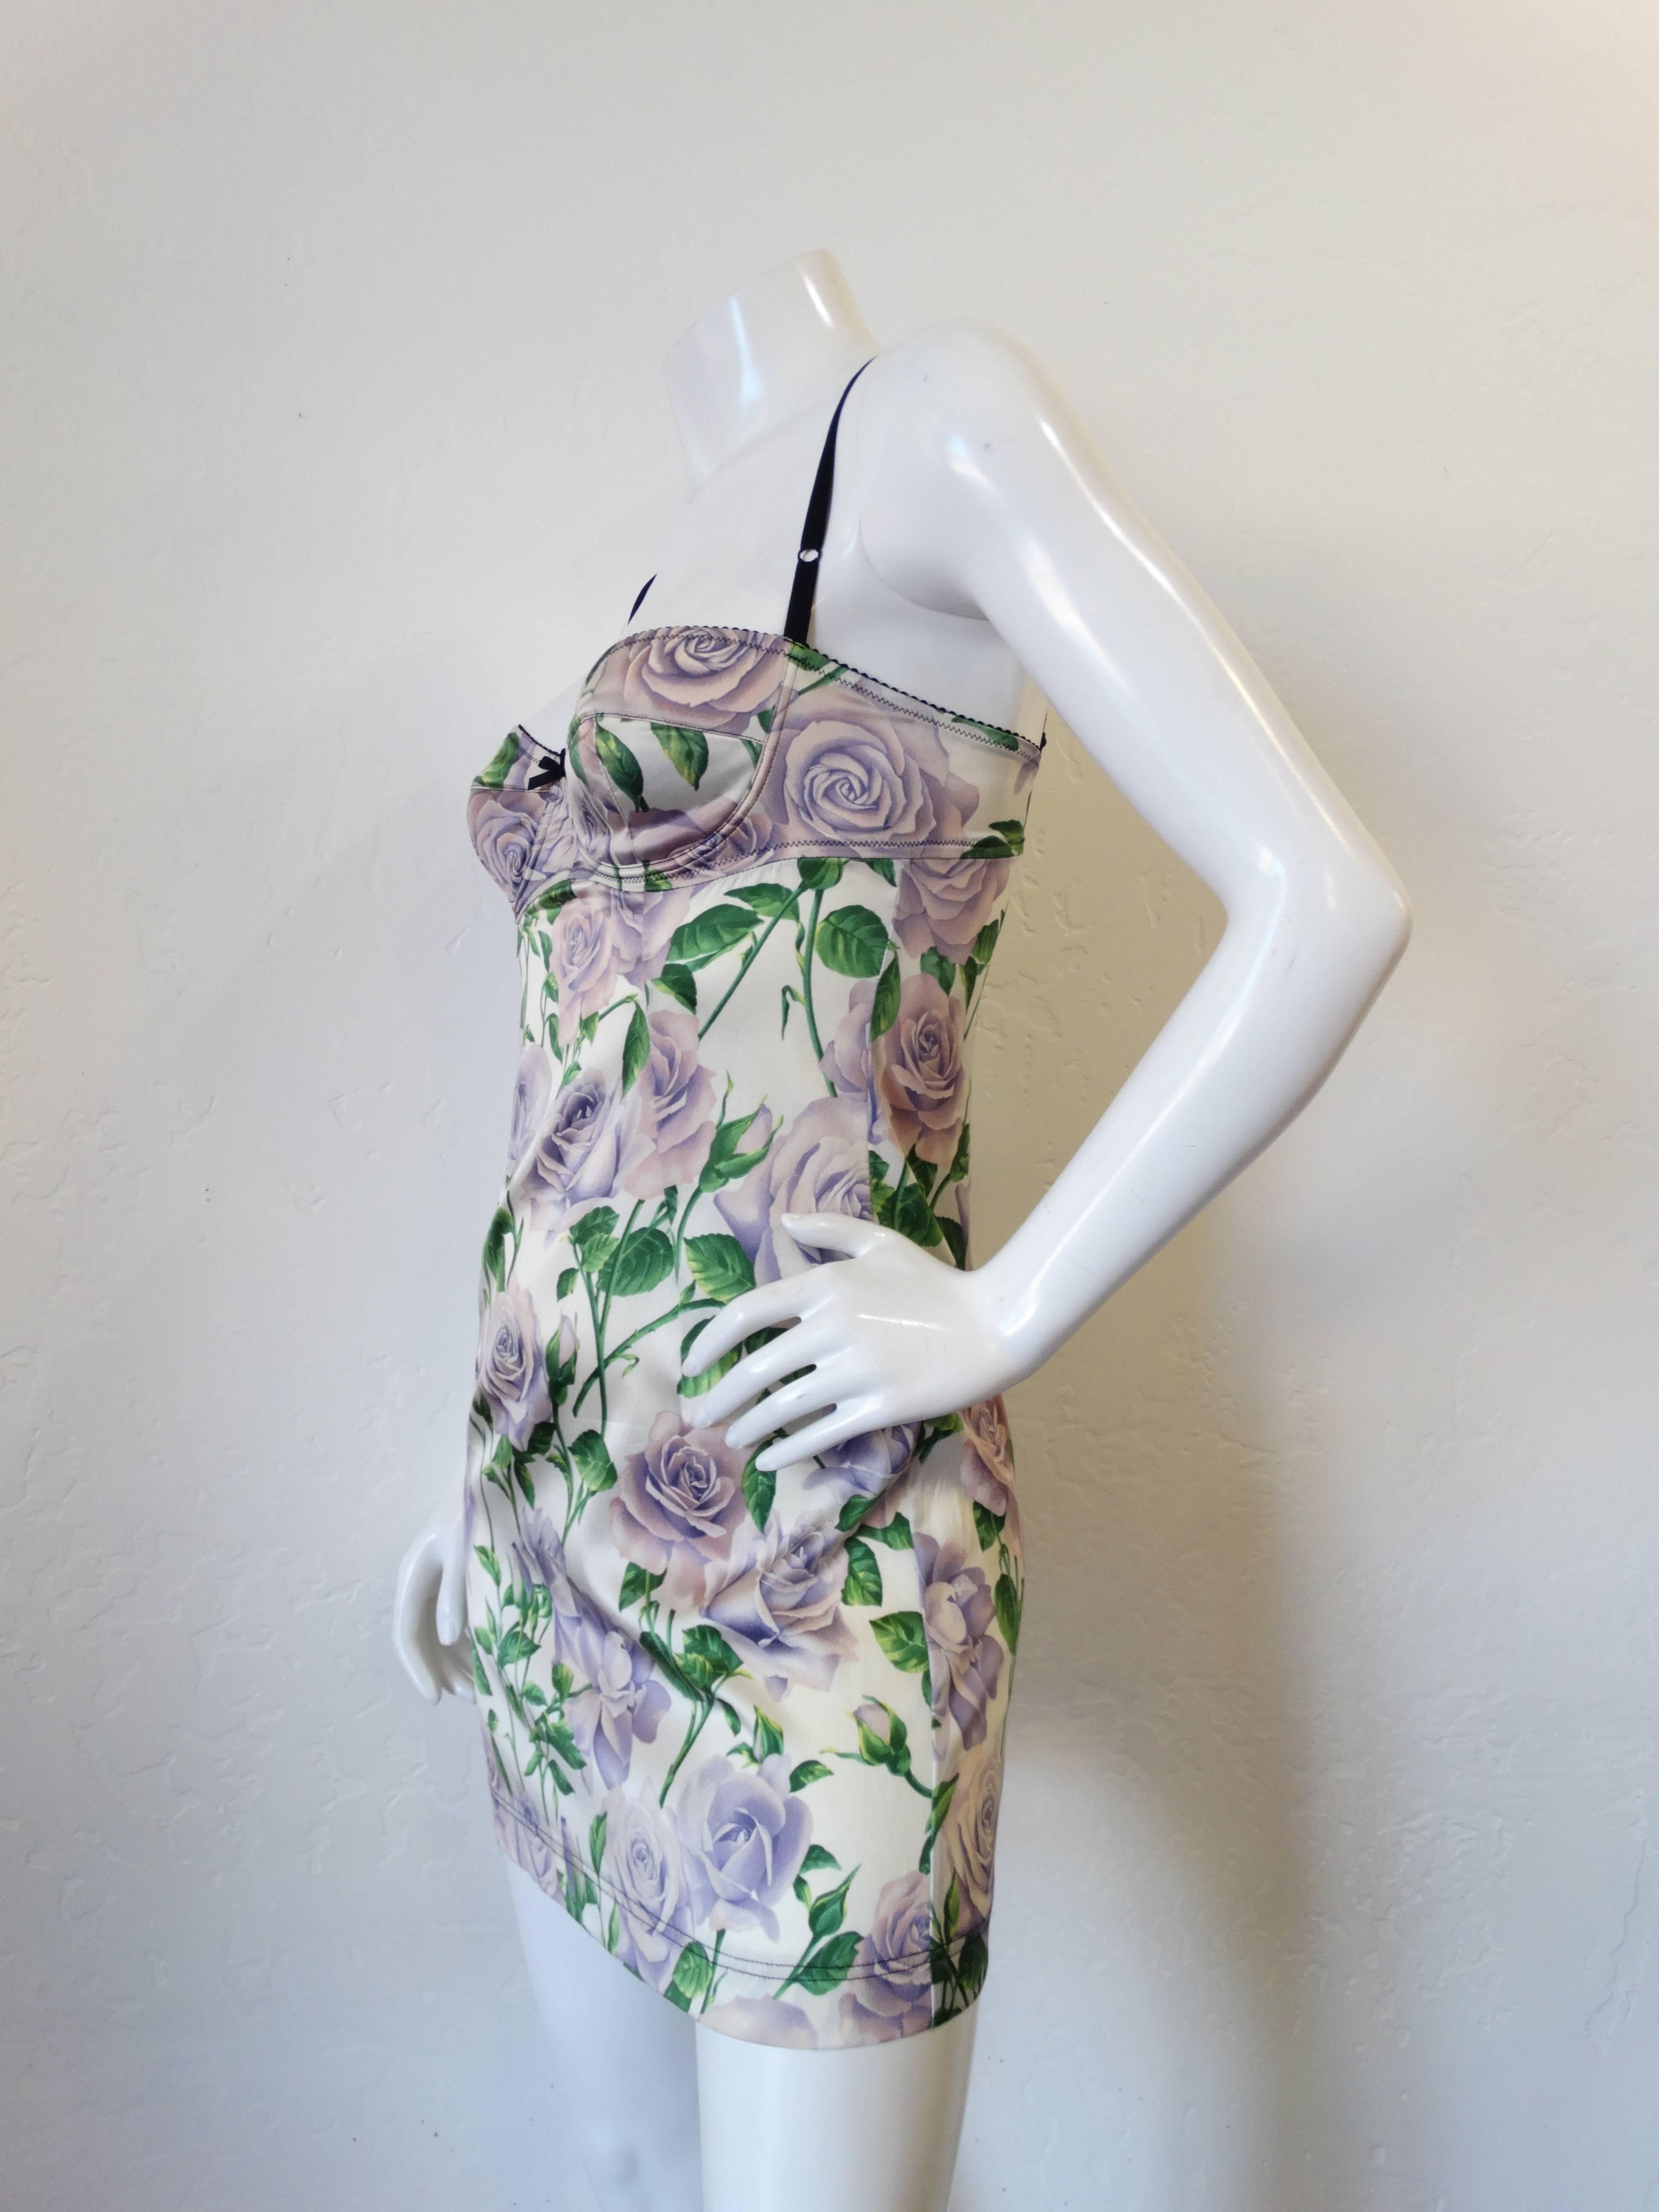 Dolce & Gabbana in a gorgeous pastel purple rose print! Classic Dolce silhouette- body con fit with cups. Adjustable straps and hook and eye closures up the back. Fabric has some light stretch to it. Marked a size 40, best fits a size Small.